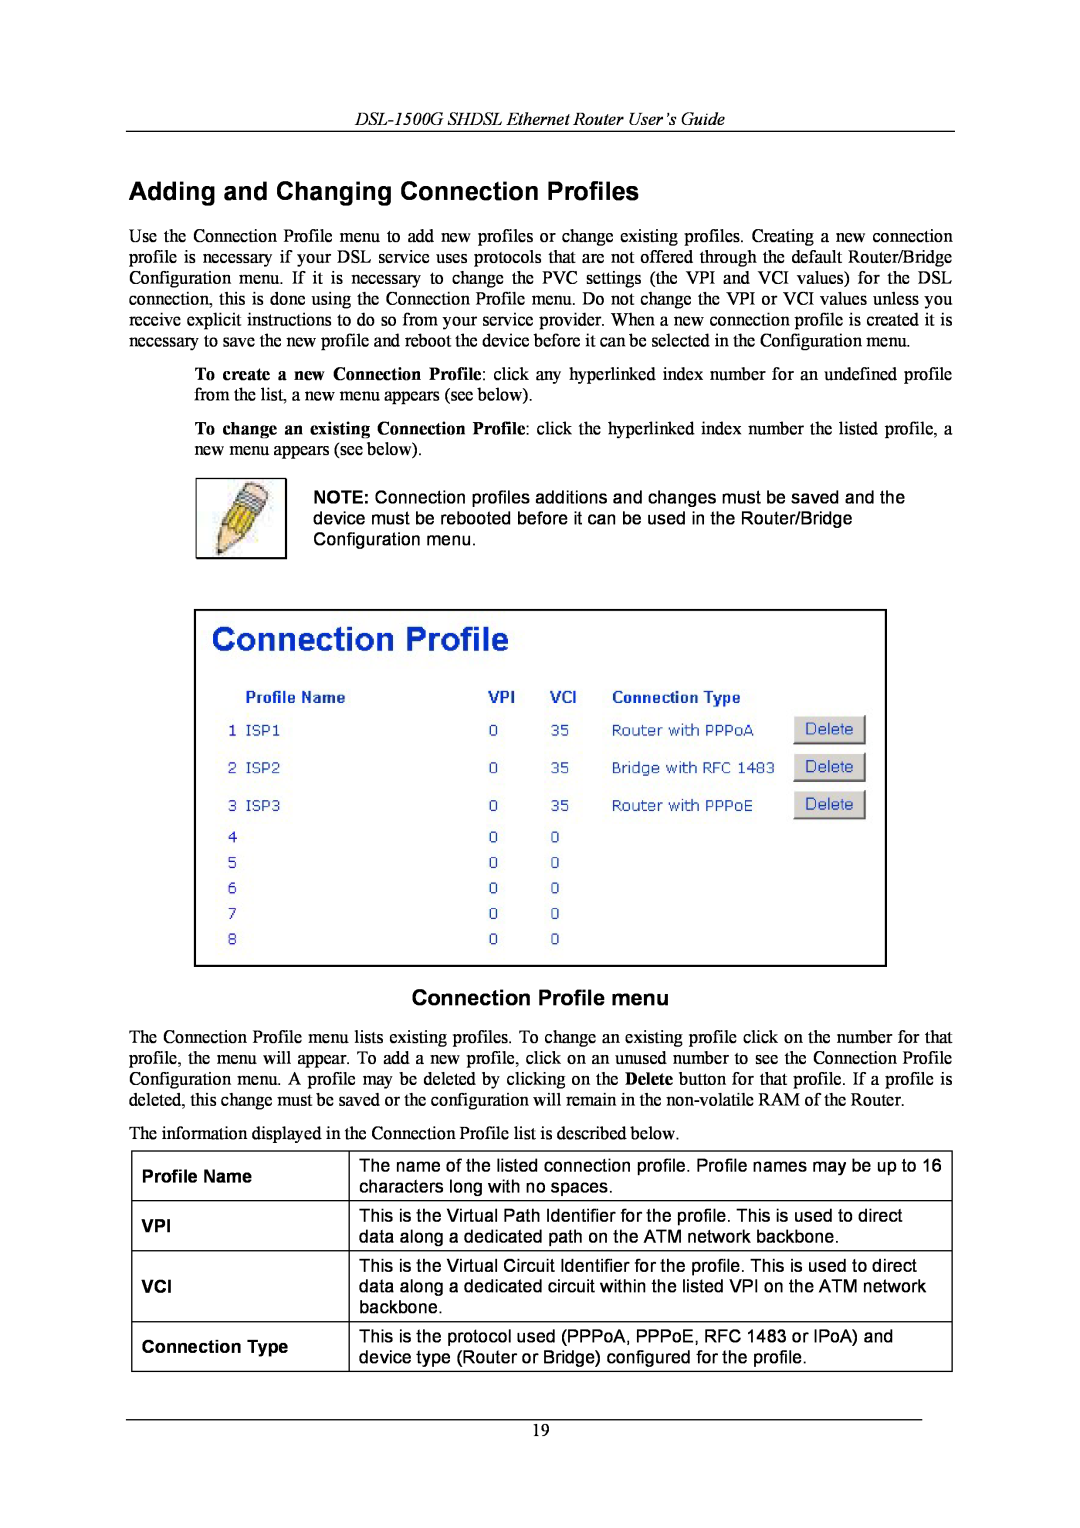 D-Link DSL-1500G manual Adding and Changing Connection Profiles, Connection Profile menu 